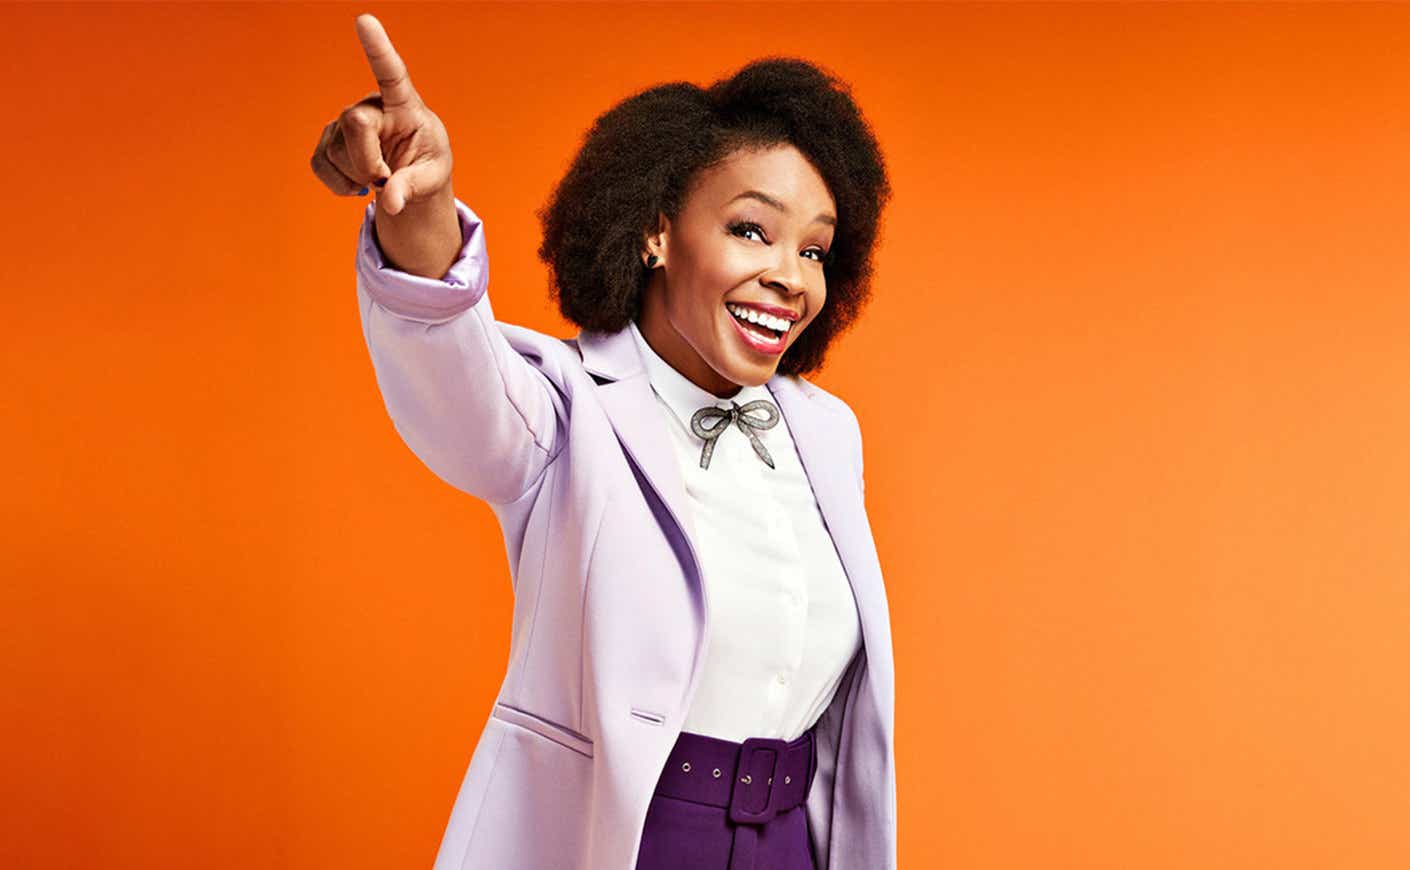 Amber Ruffin points and smiles on orange background